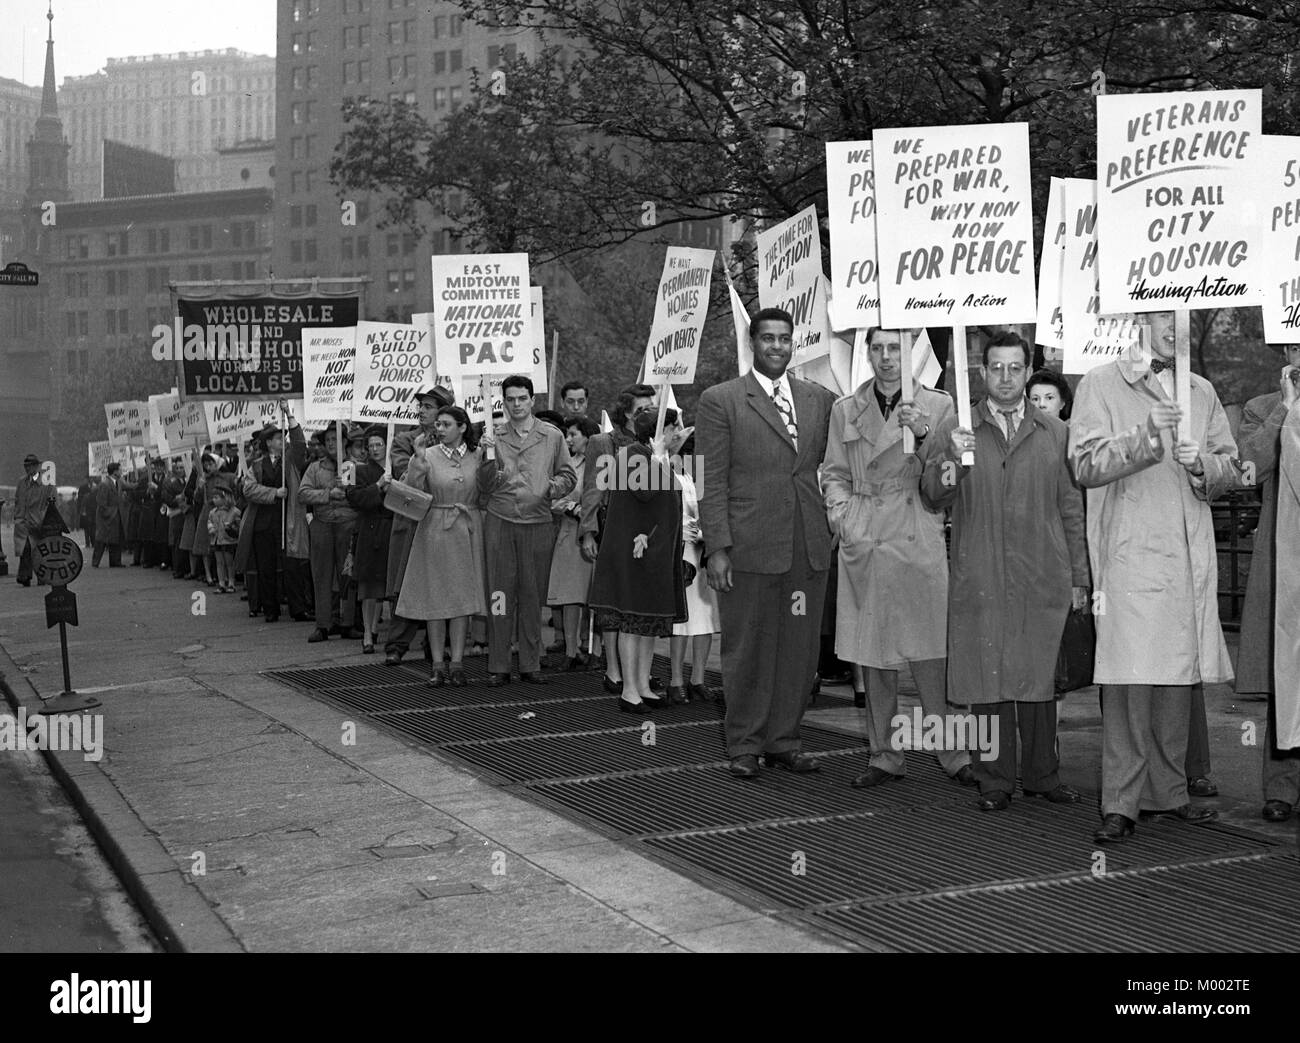 1946 WWII Veterans Housing Protests City Hall, New York Stock Photo